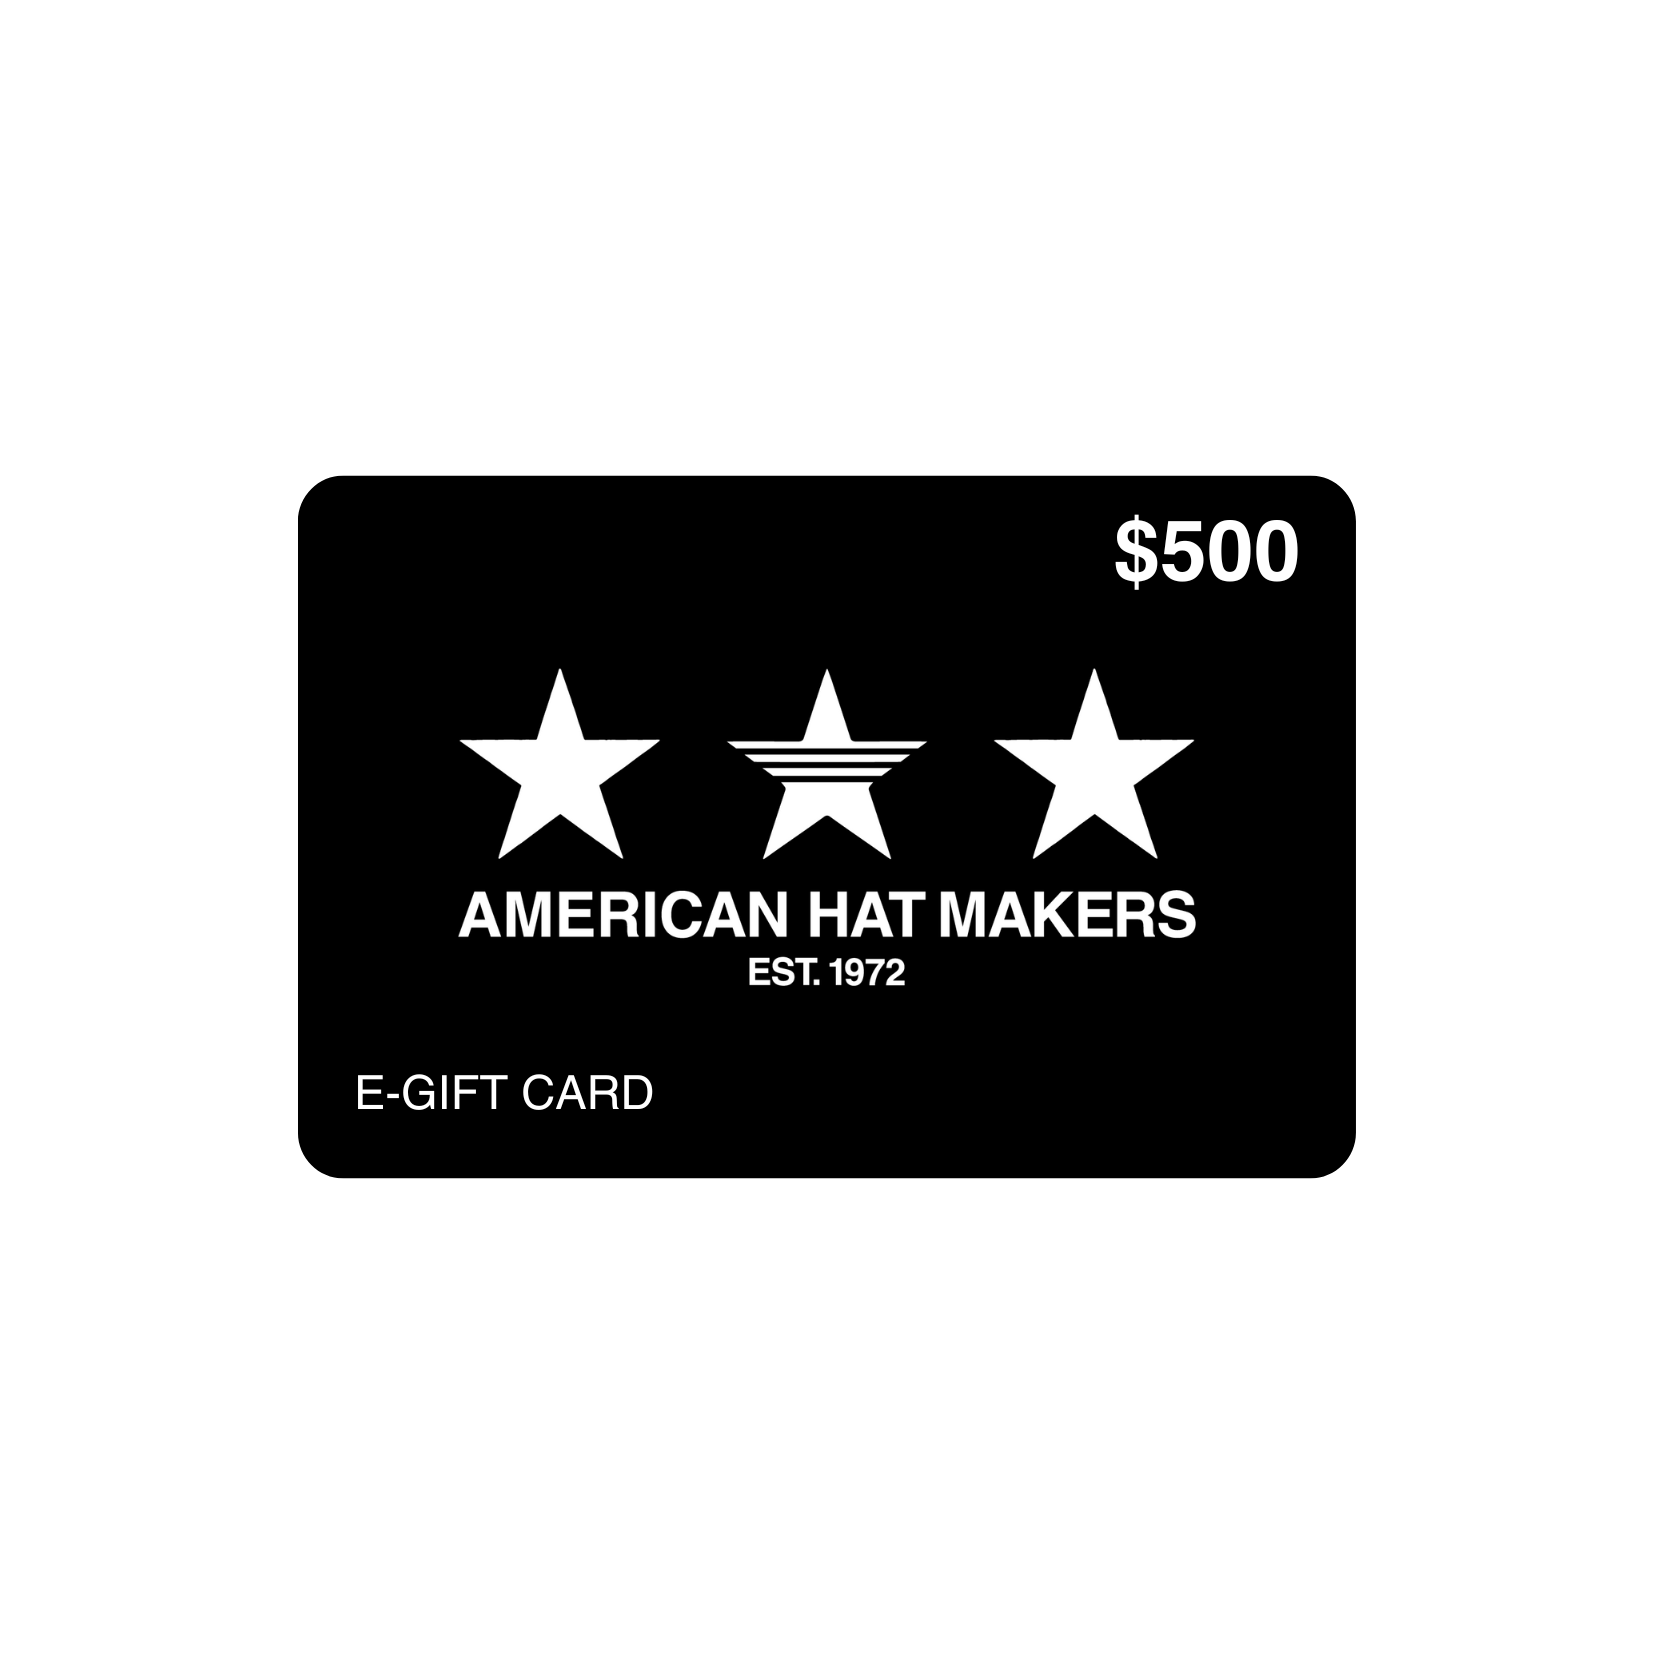 Electronic Gift Card amounting to $500 by American Hat Makers